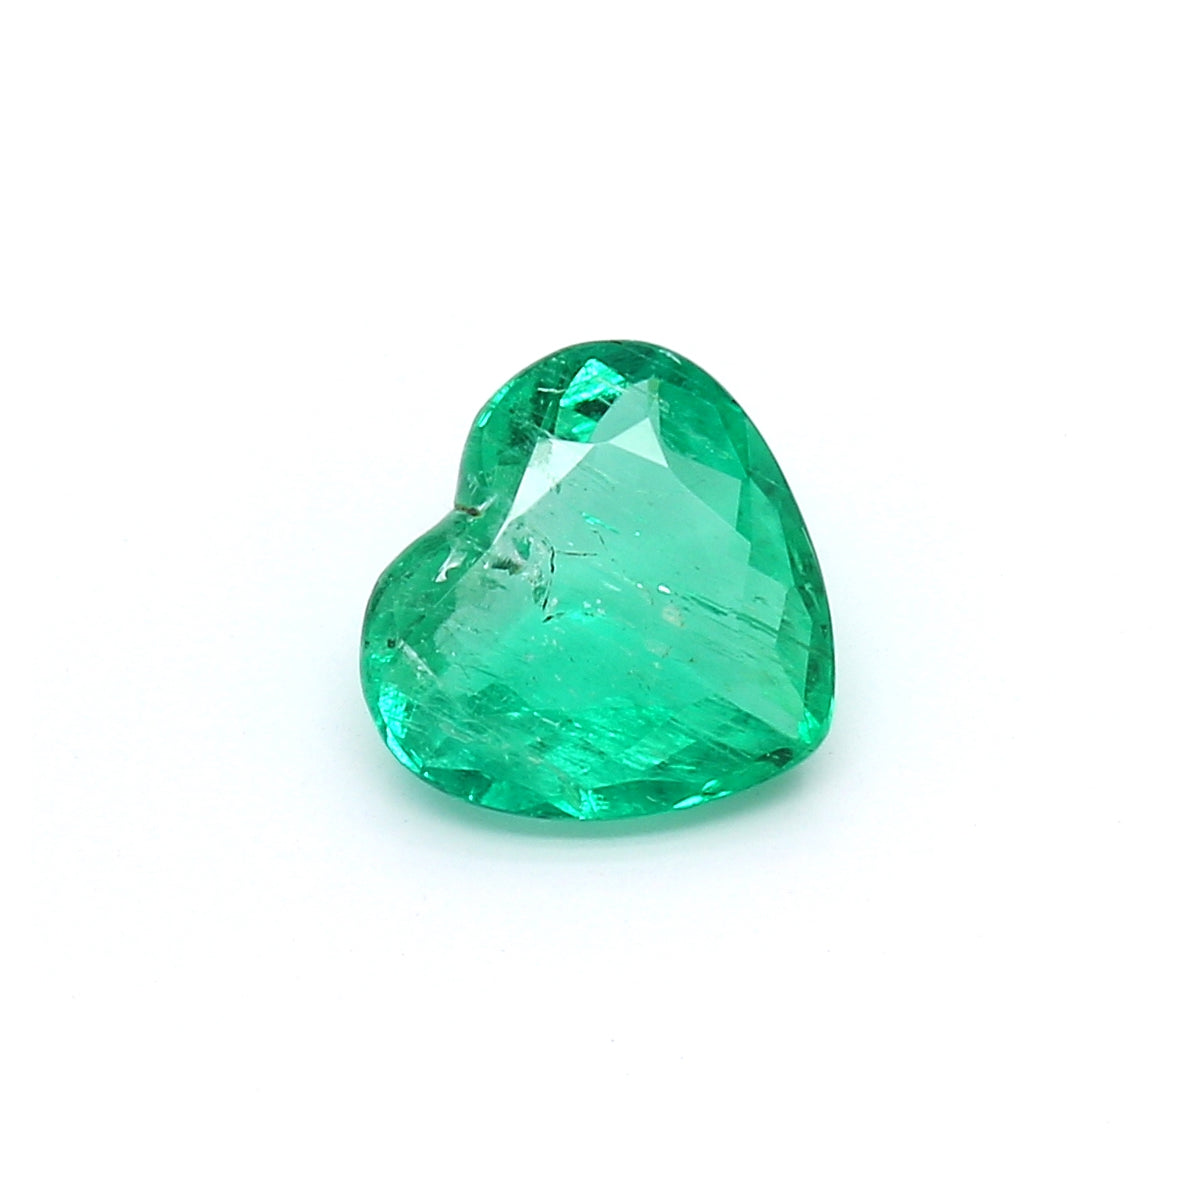 1.47ct Heart Shape Emerald, Moderate Resin, Colombia - 8.07 x 8.68 x 3.83mm